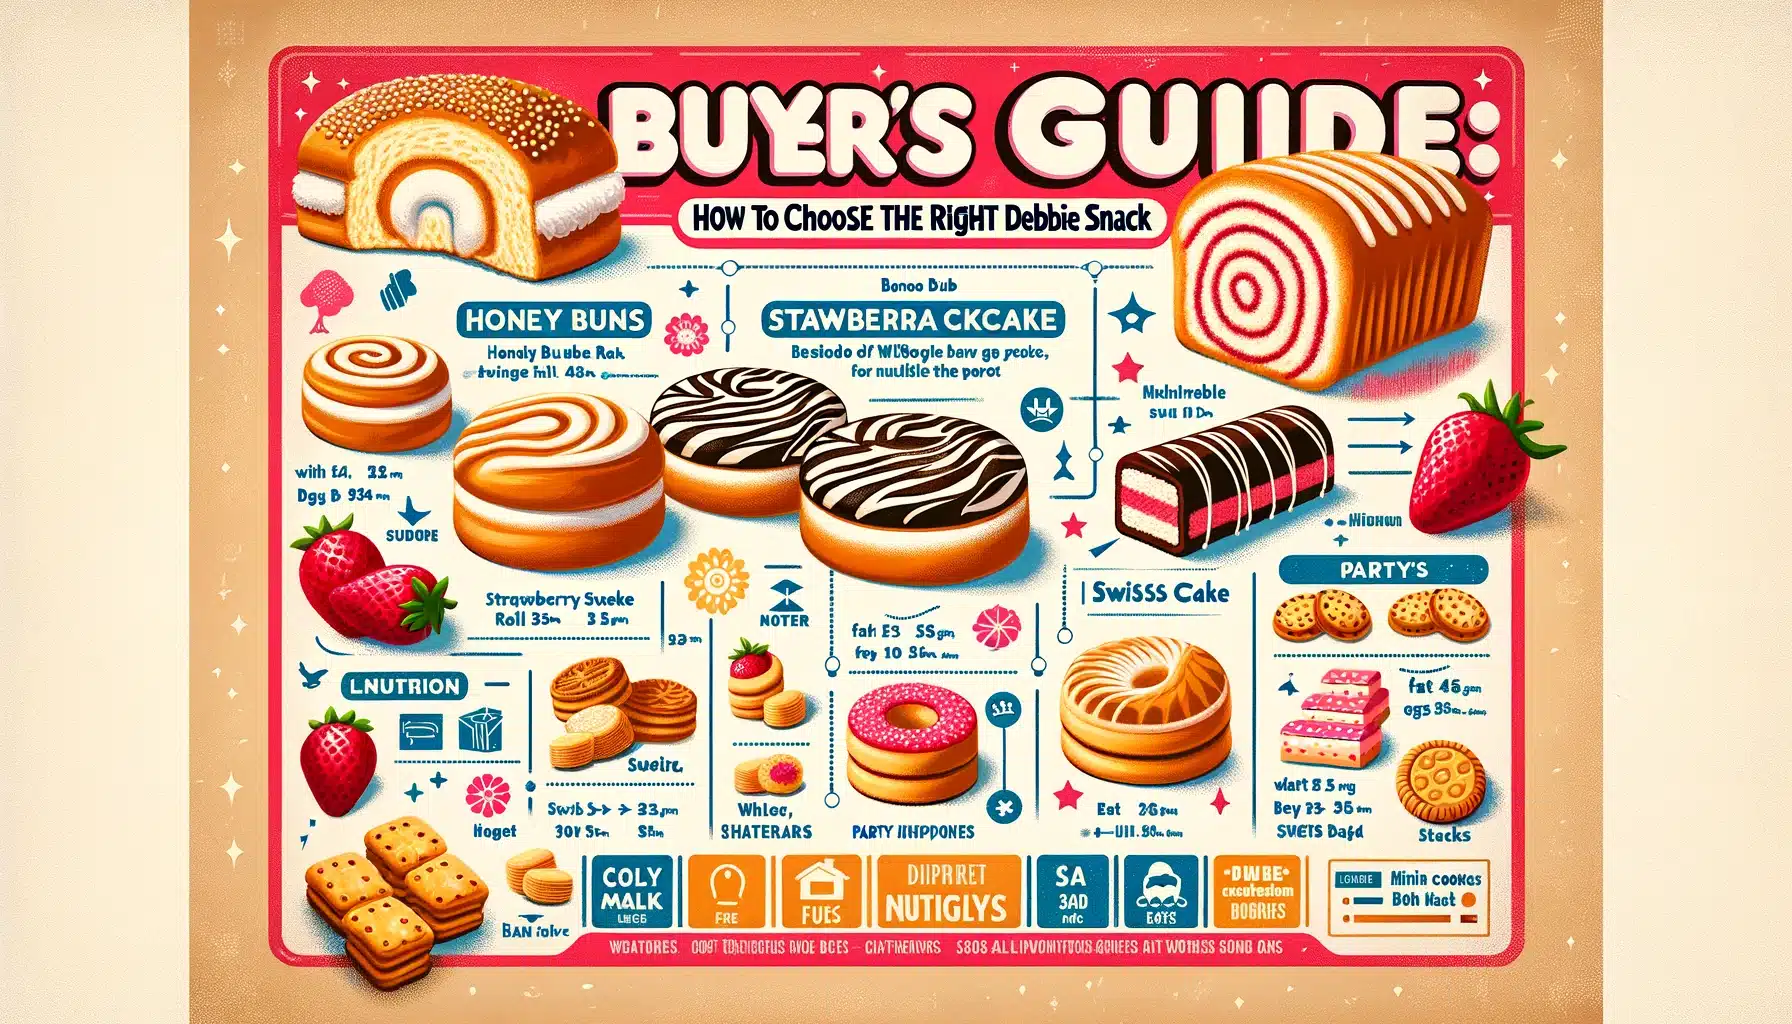 How to Choose the Right Little Debbie Snack